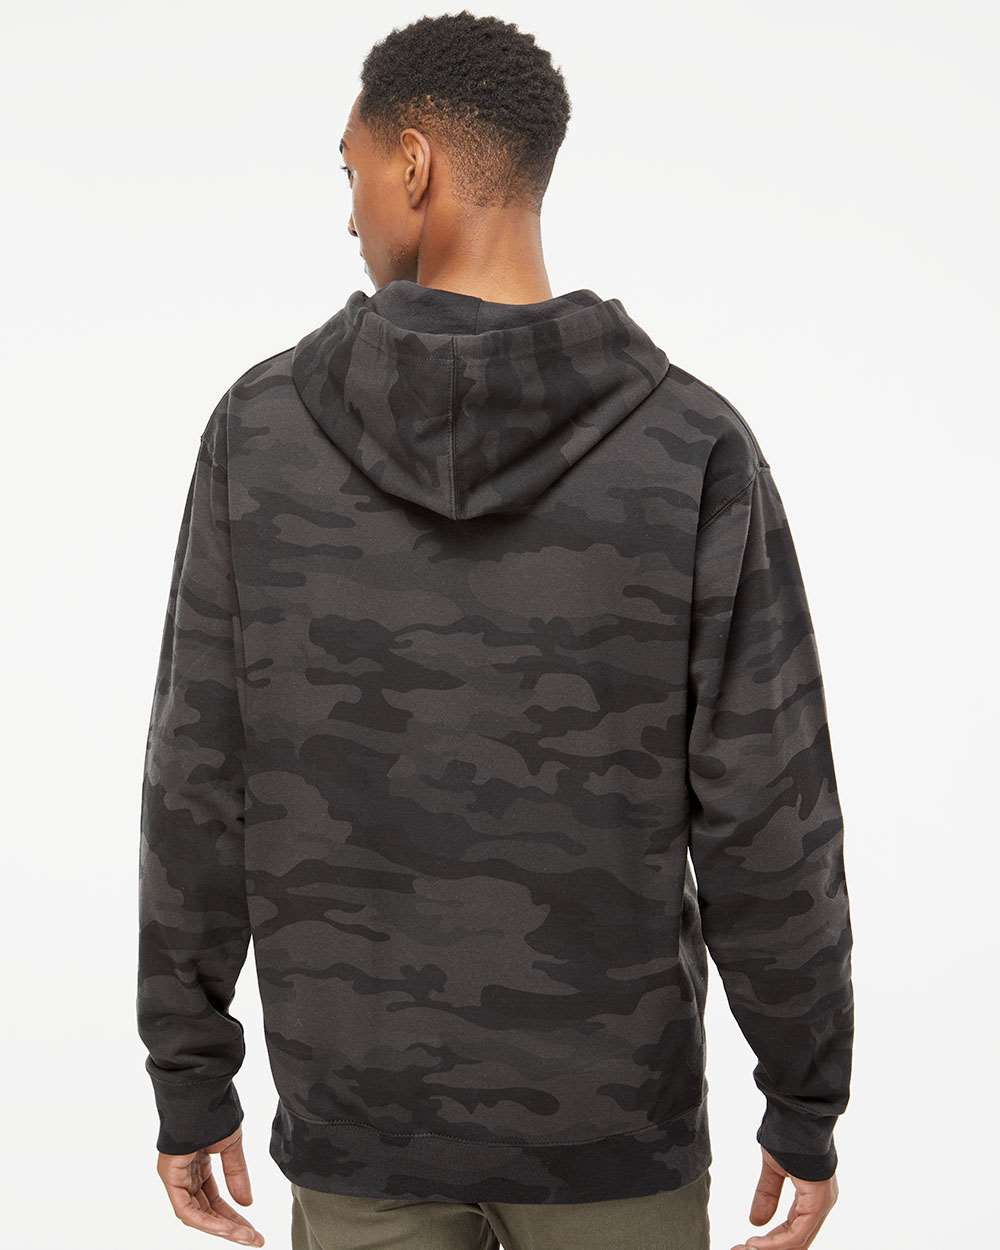 Independent Trading Co. Midweight Hooded Sweatshirt SS4500 #colormdl_Black Camo